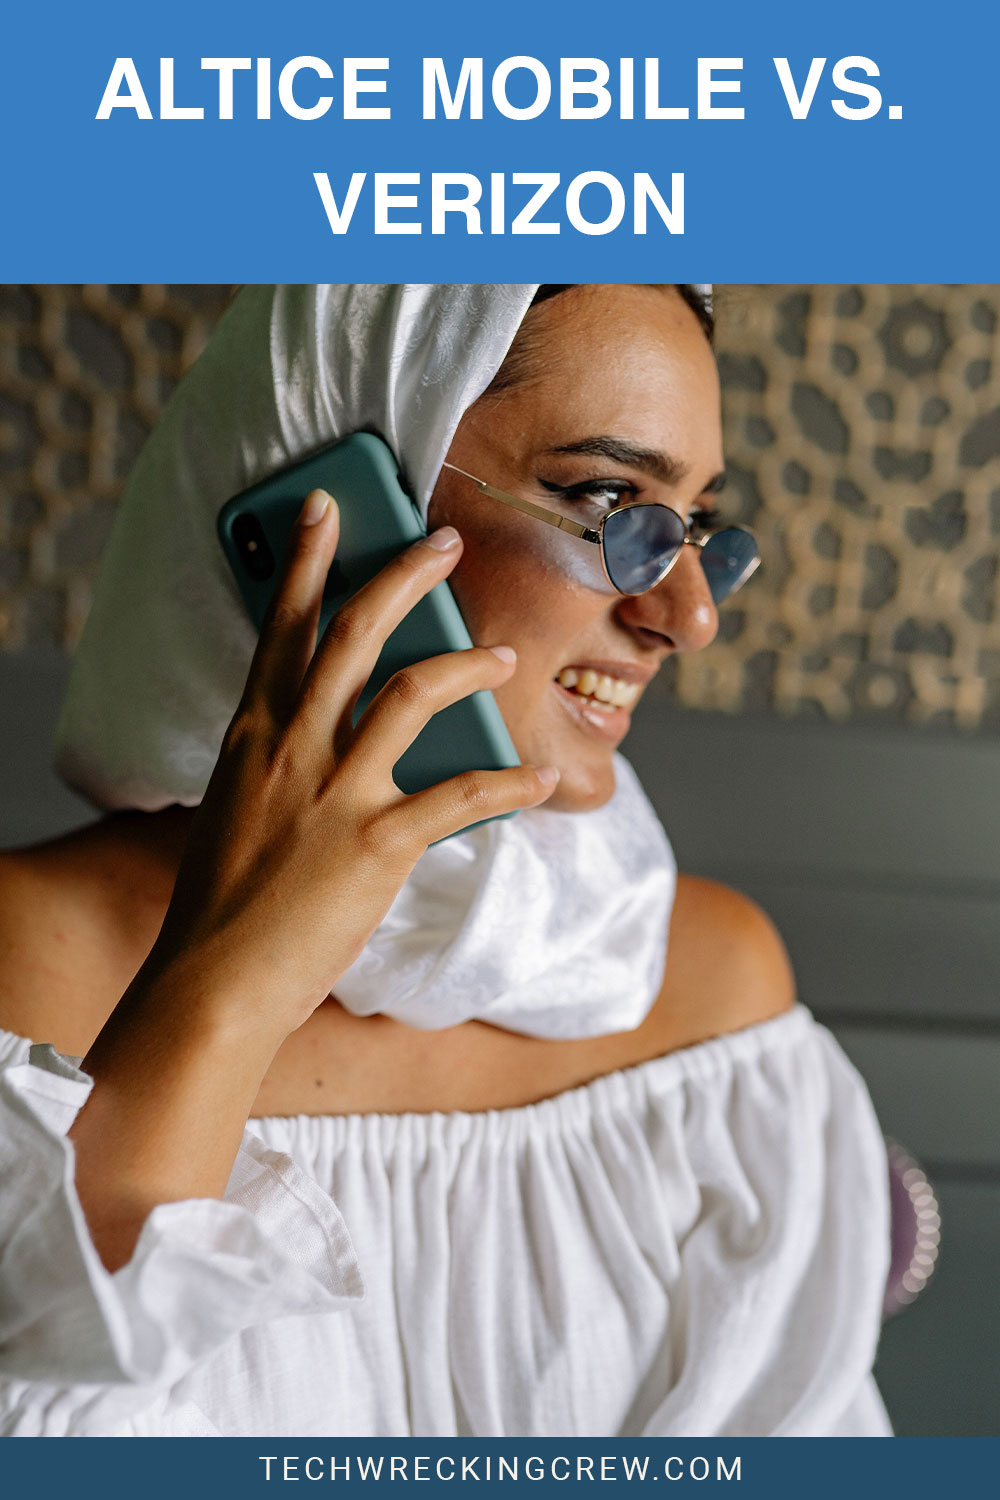 Woman in white dress and a sunglass holding a phone over her ear - Altice Mobile Vs. Verizon